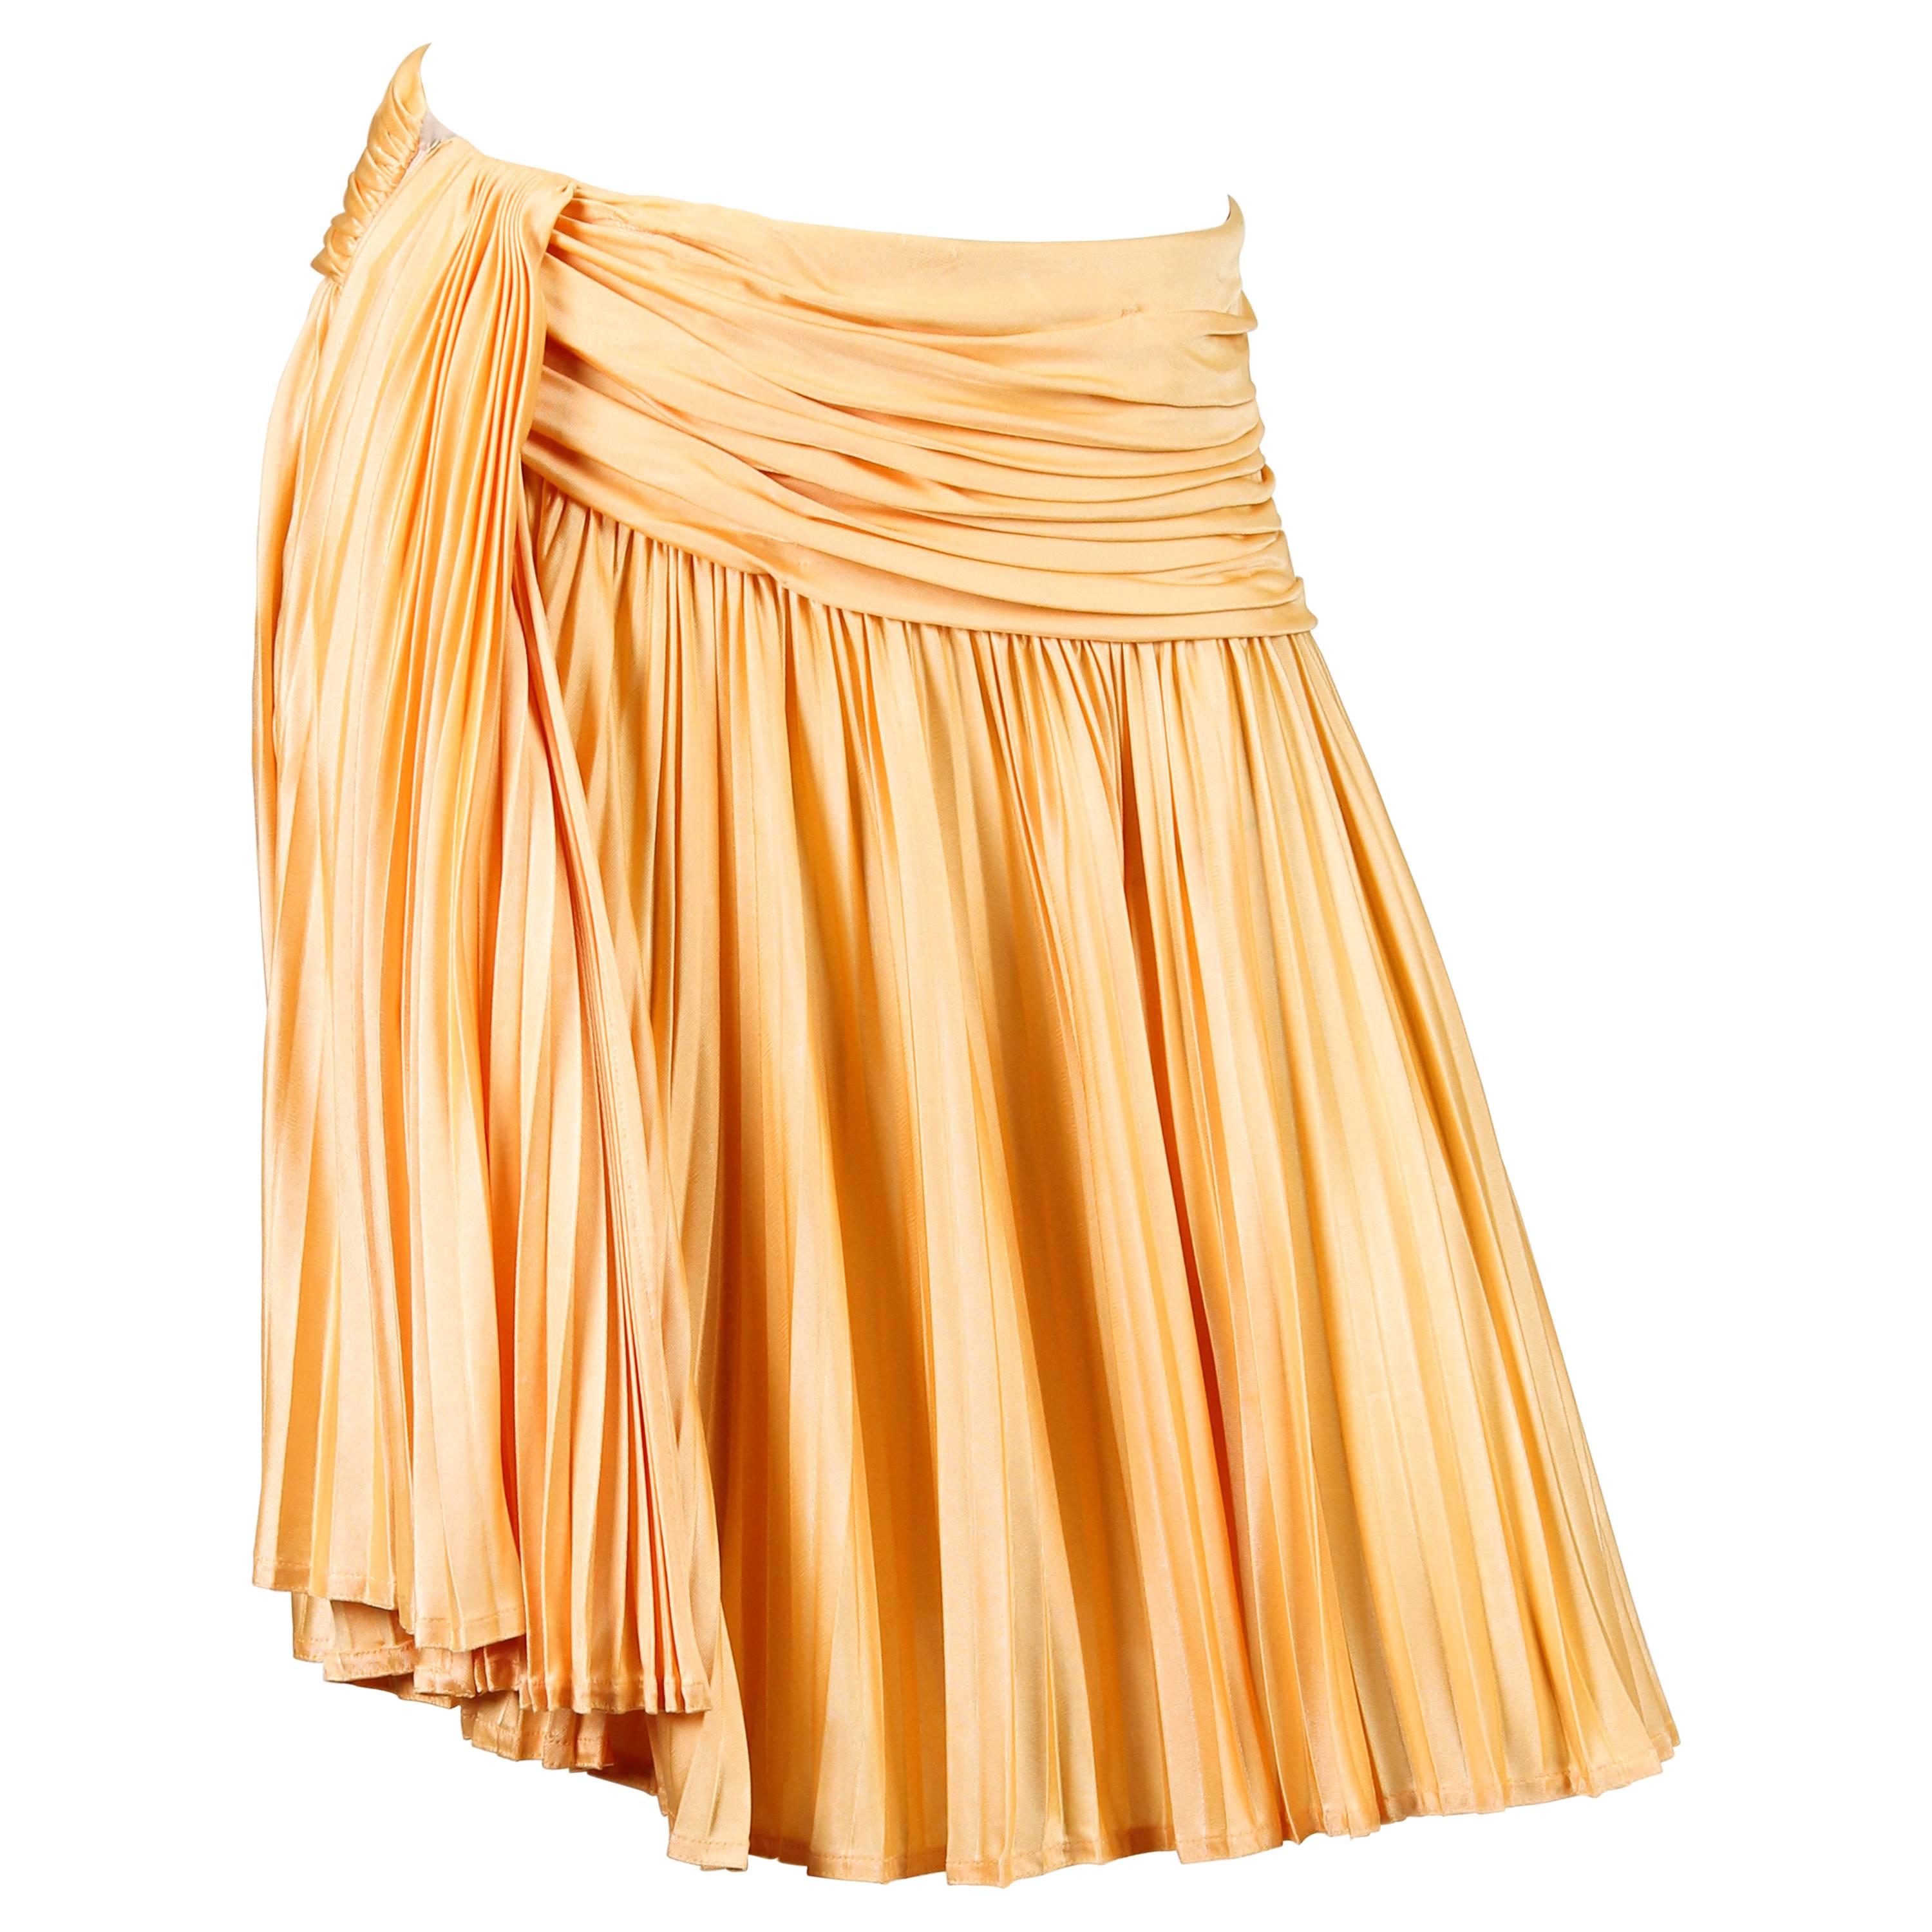 1990S GIANNI VERSACE Buttercream Yellow Rayon Jersey Mini Skirt With Slit For Sale